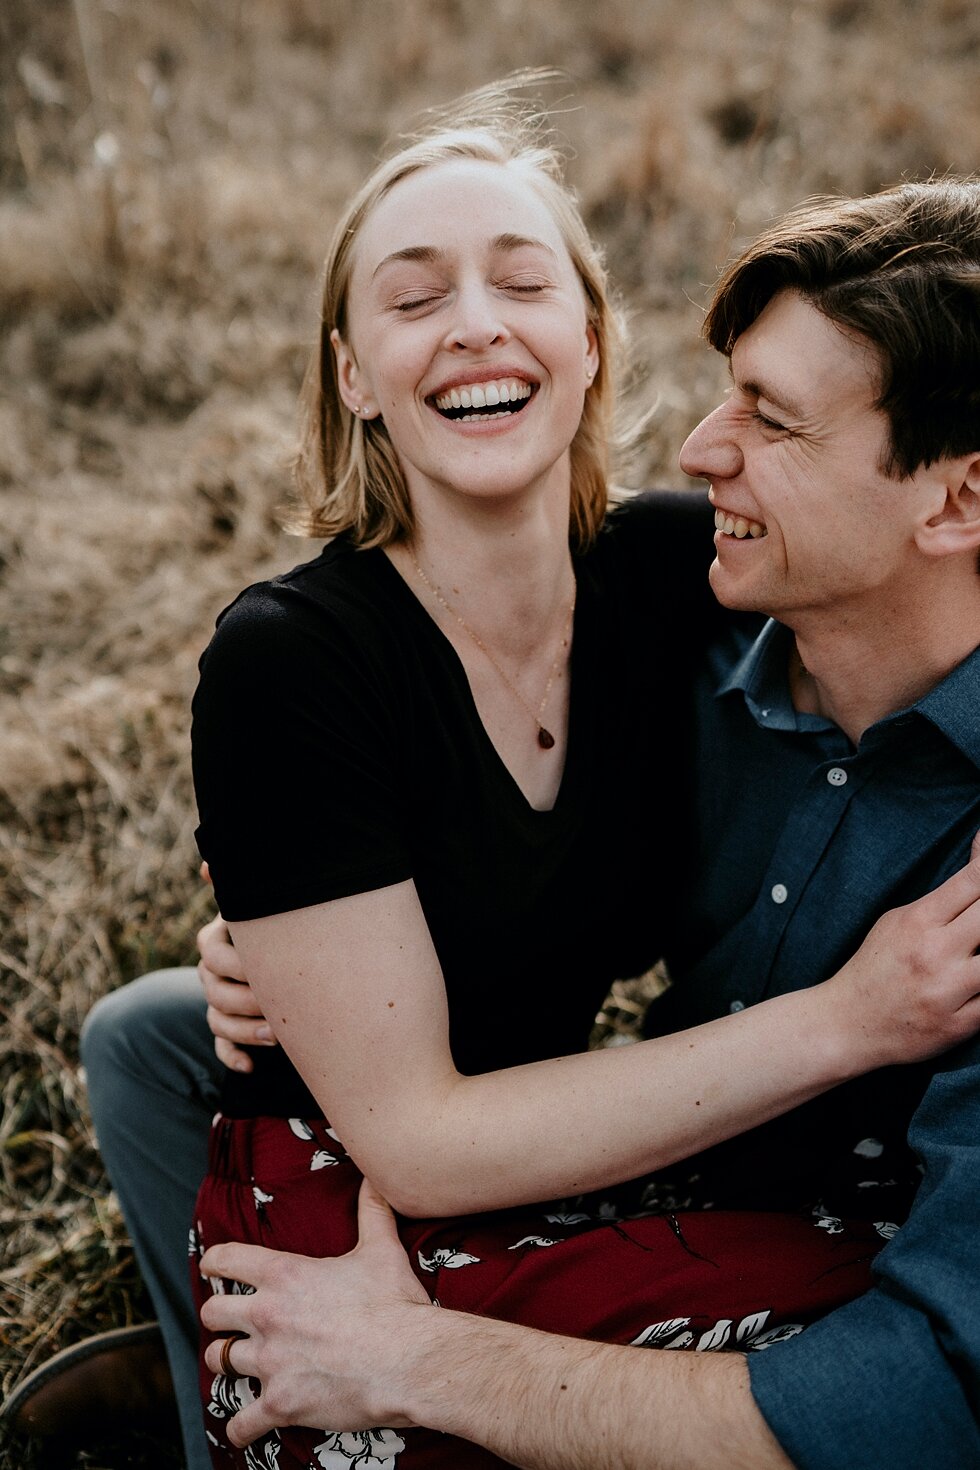  There is nothing like a good laugh shared between two people in love. Kentucky mountains red floral skirt dark black shirt cloudy skies engagement session Photography by Lauren outdoor #photographybylauren #kentuckyengagementphotography #bernheimfor